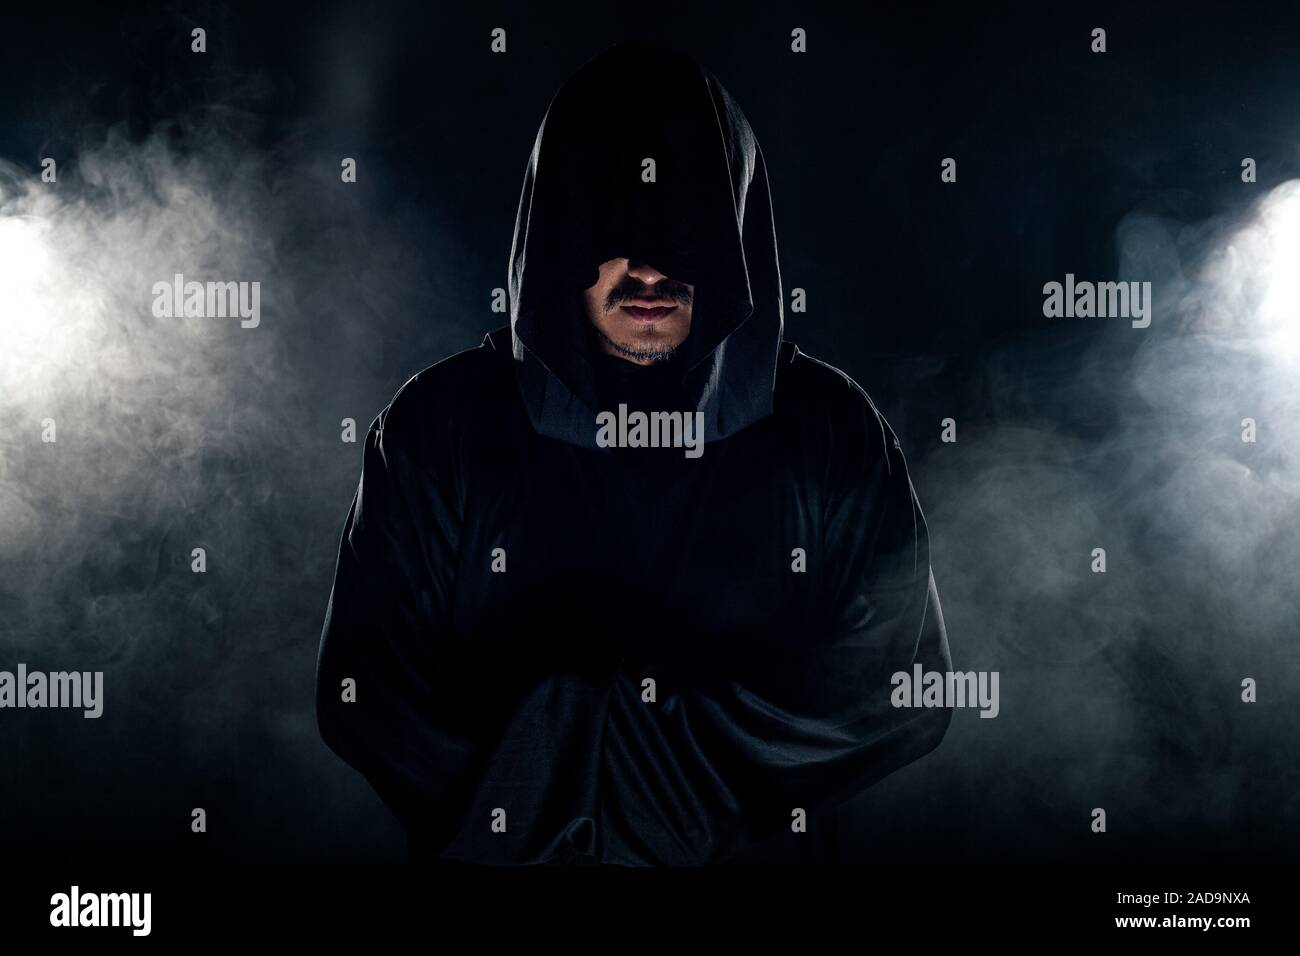 Man dressed in a dark robe looking like a cult leader on a smoky or foggy  background. He looks like a creepy evil villain Stock Photo - Alamy